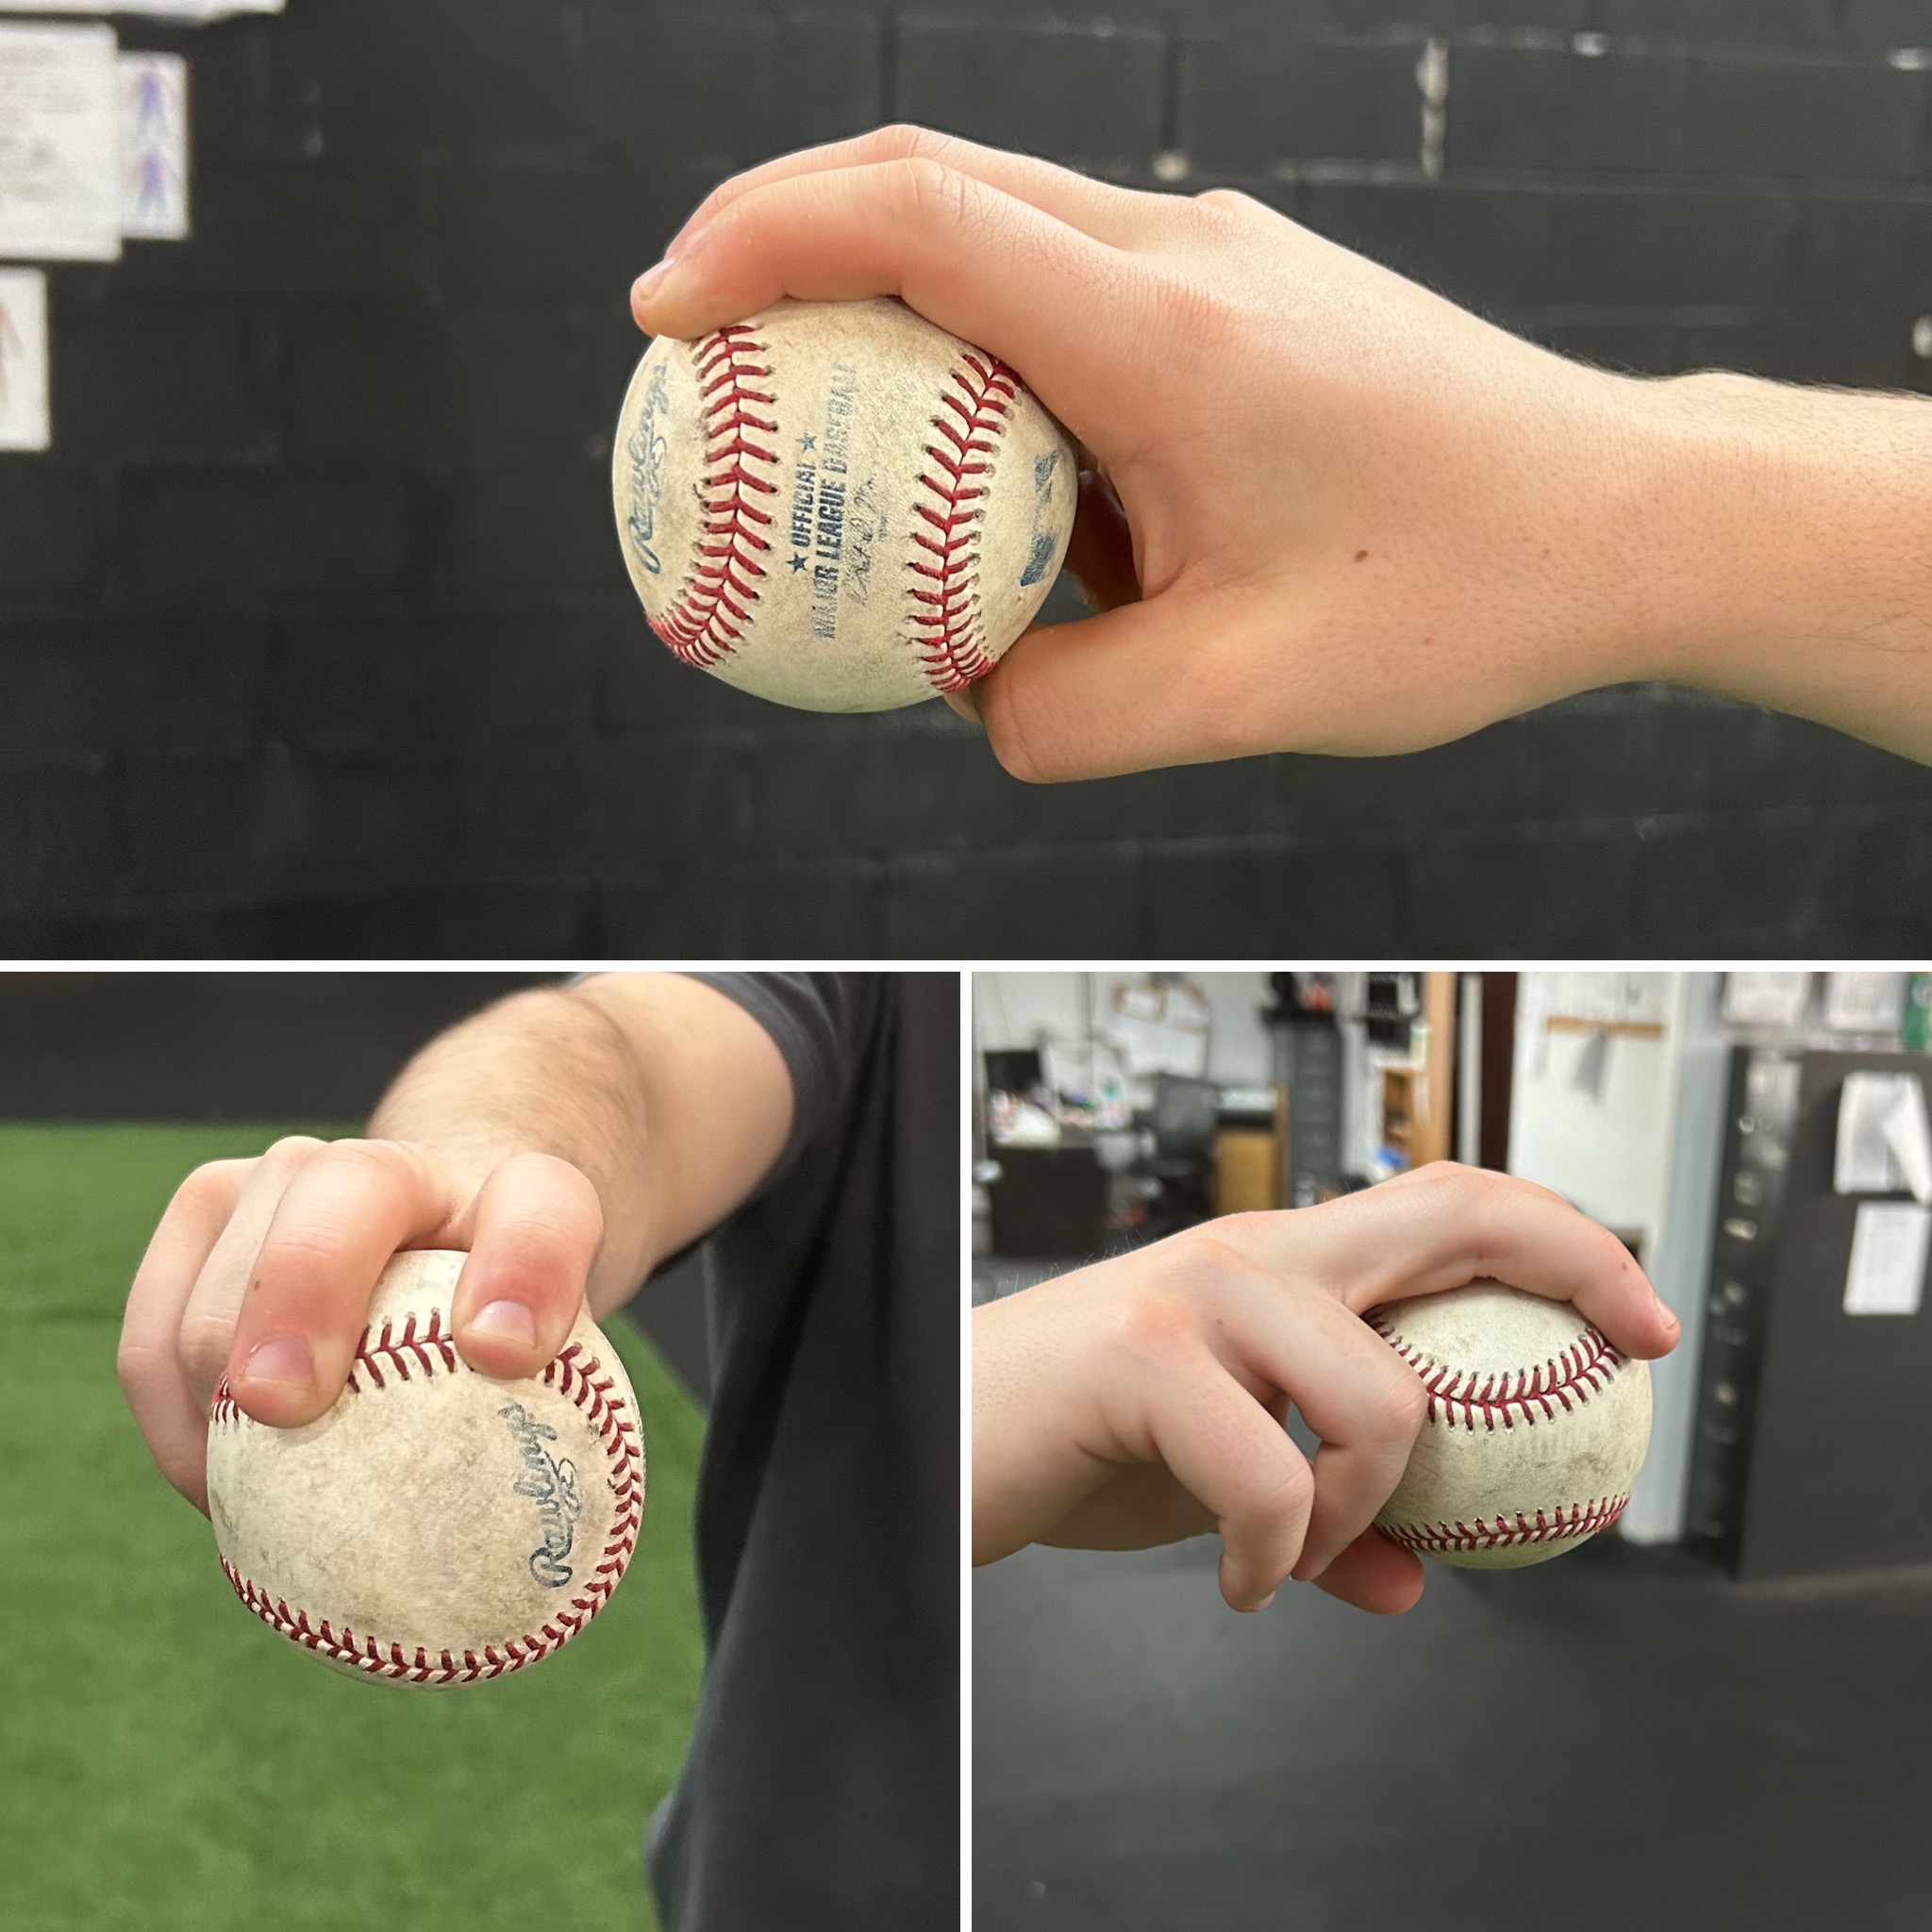 How to Throw a Sinker or 2-seam (Grips, Cues, Types, etc.) • RPP